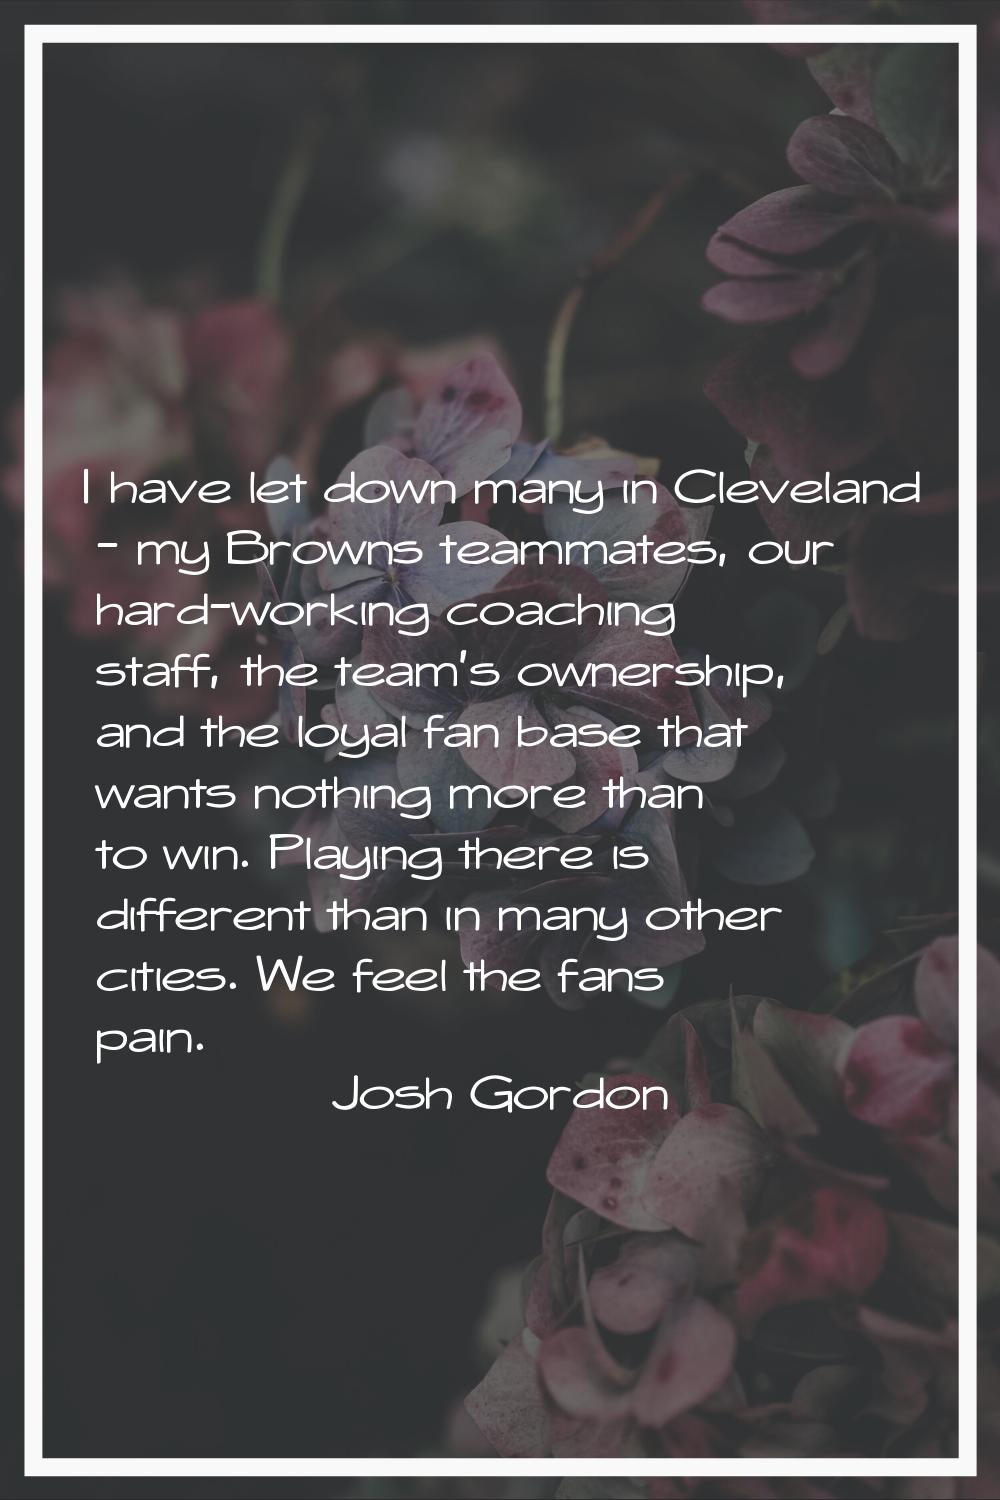 I have let down many in Cleveland - my Browns teammates, our hard-working coaching staff, the team'